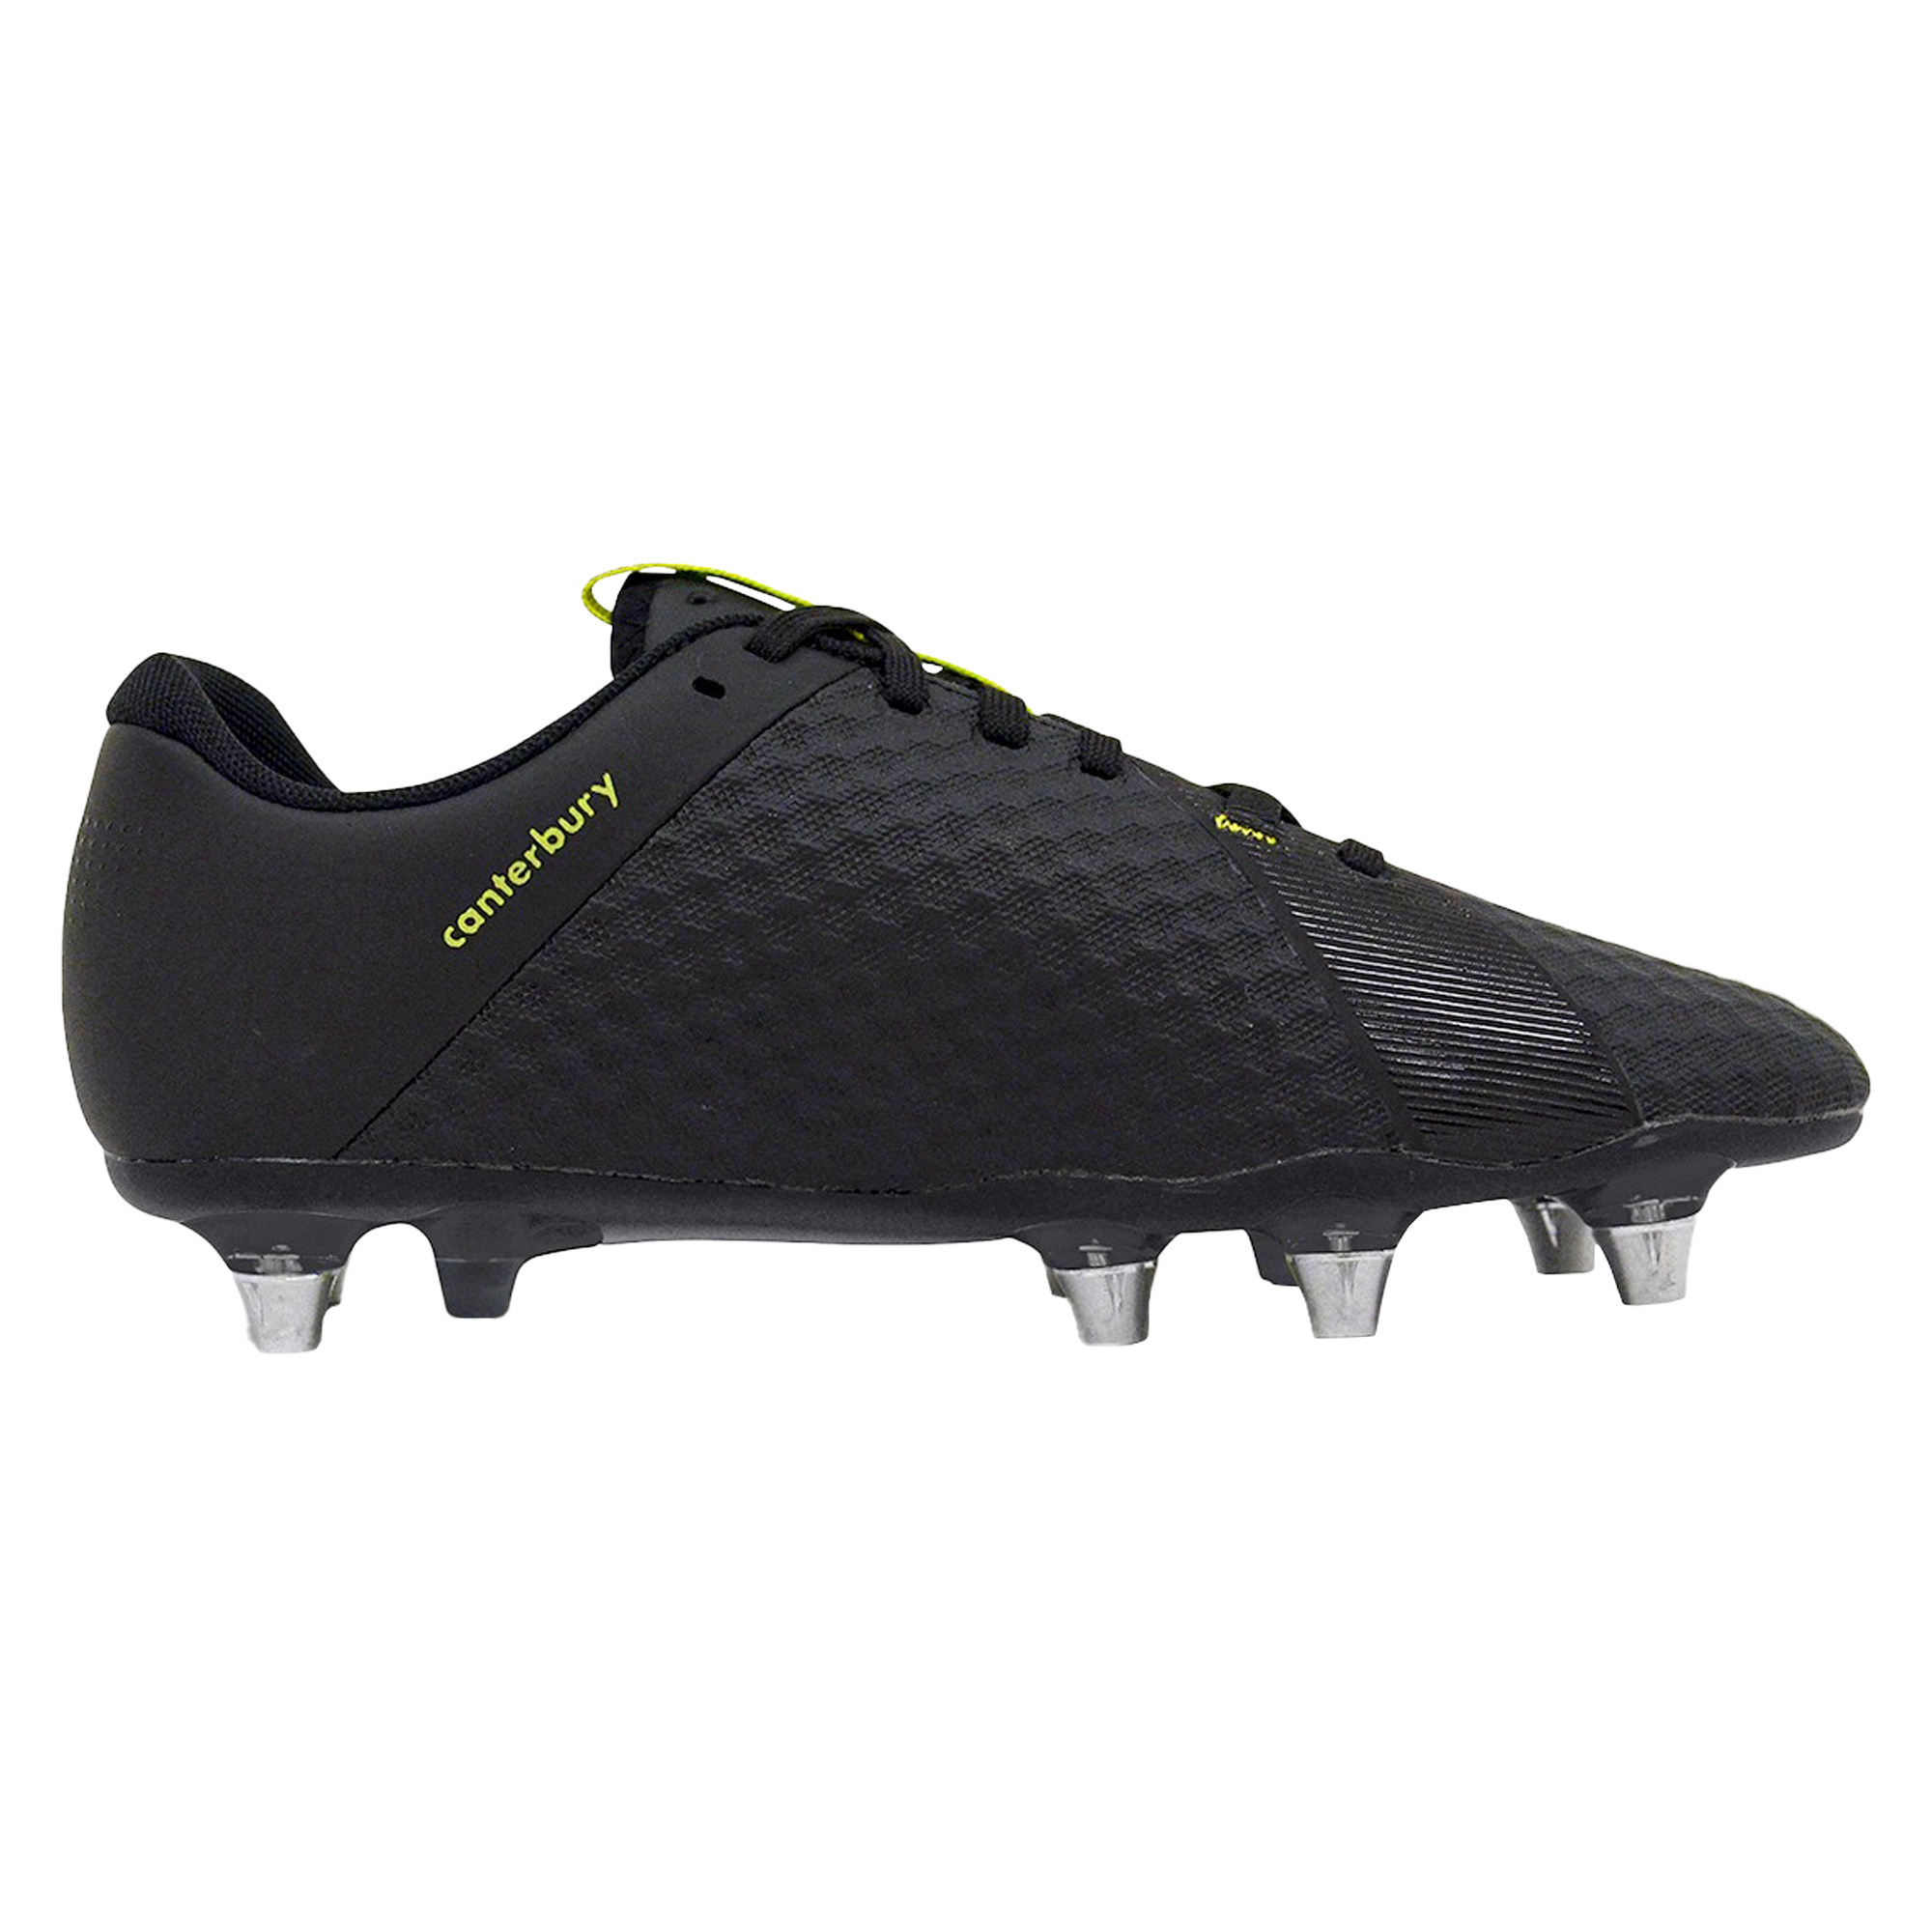 Chaussures de Rugby Canterbury Phoenix 3.0 SG Pro